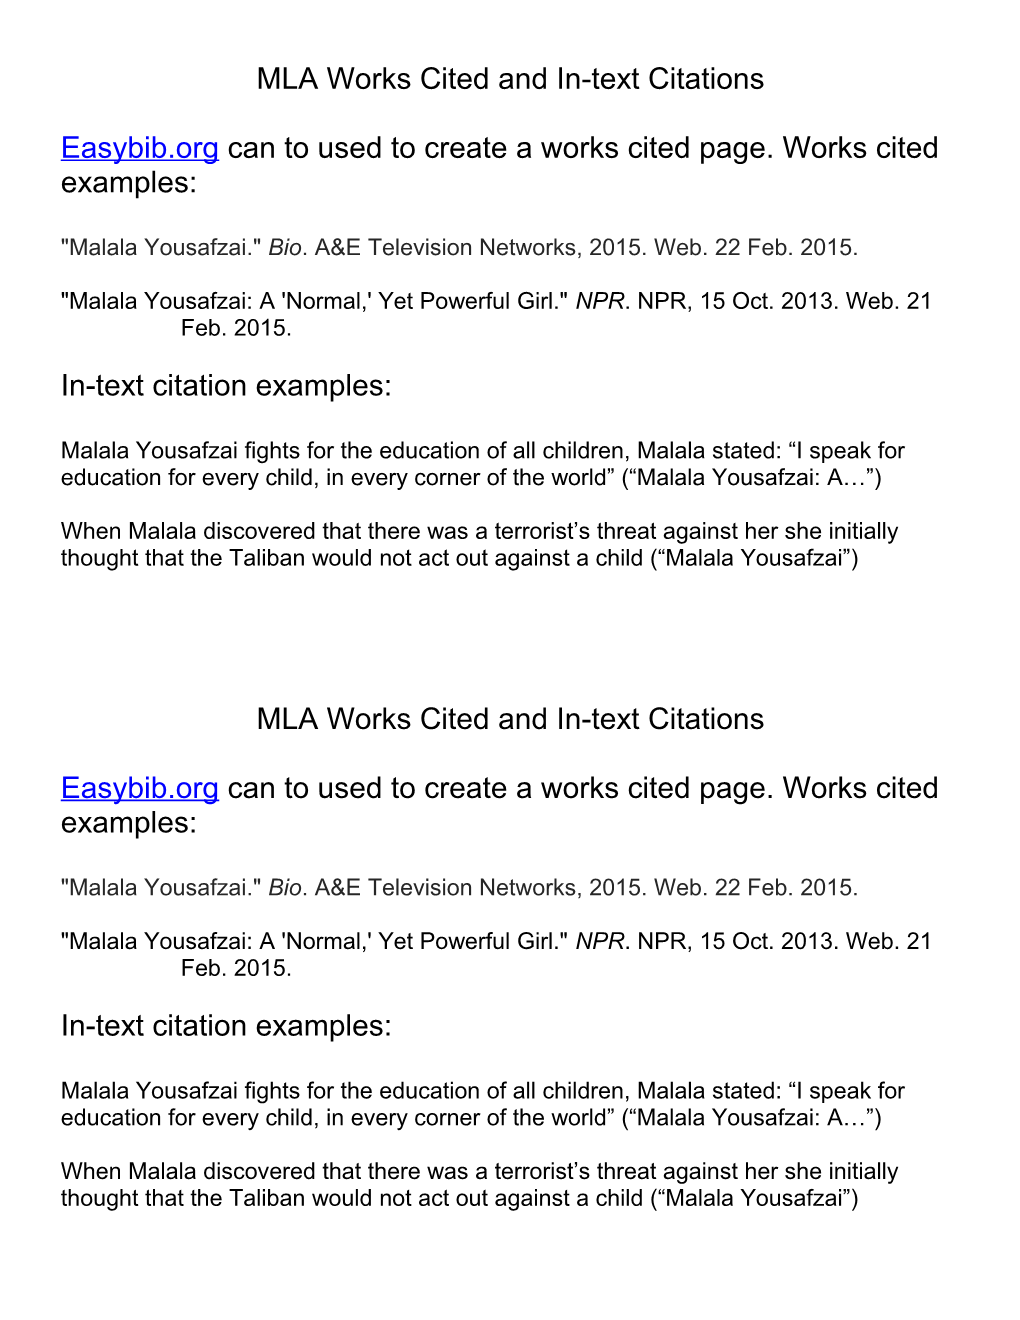 MLA Works Cited and In-Text Citations